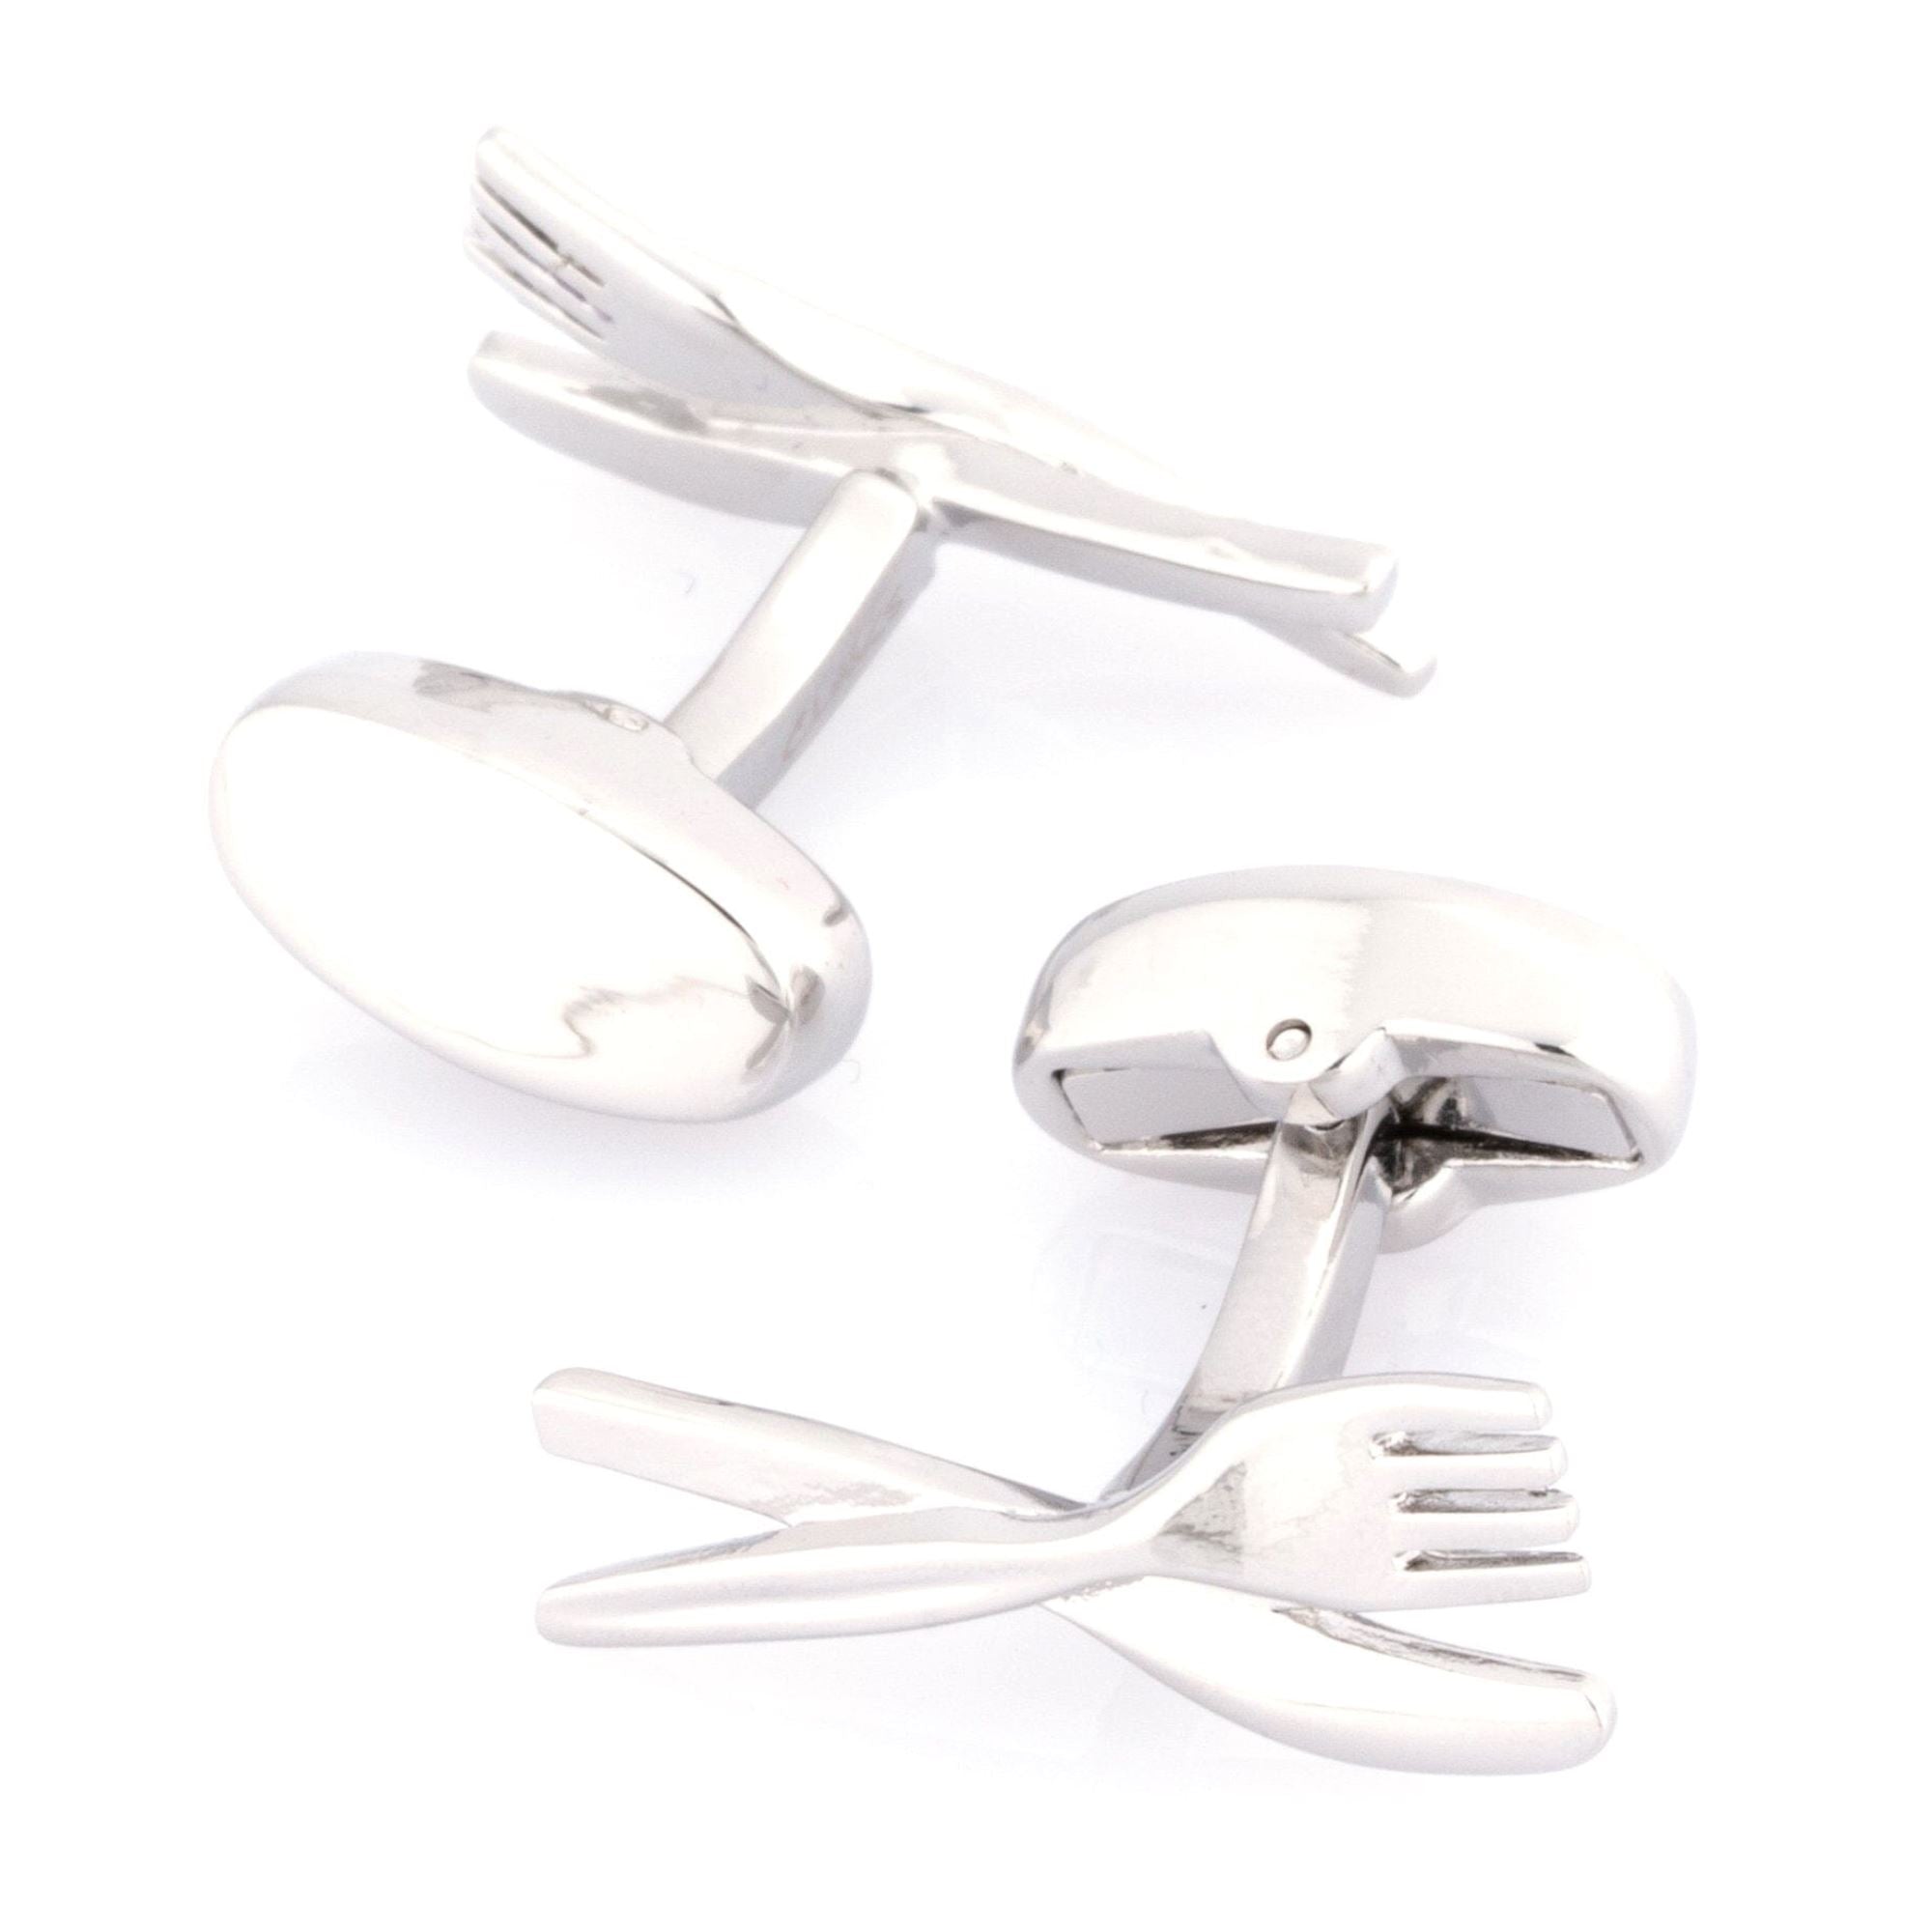 Knife and Fork Cufflinks Silver Novelty Cufflinks Clinks Australia Knife and Fork Cufflinks Silver 